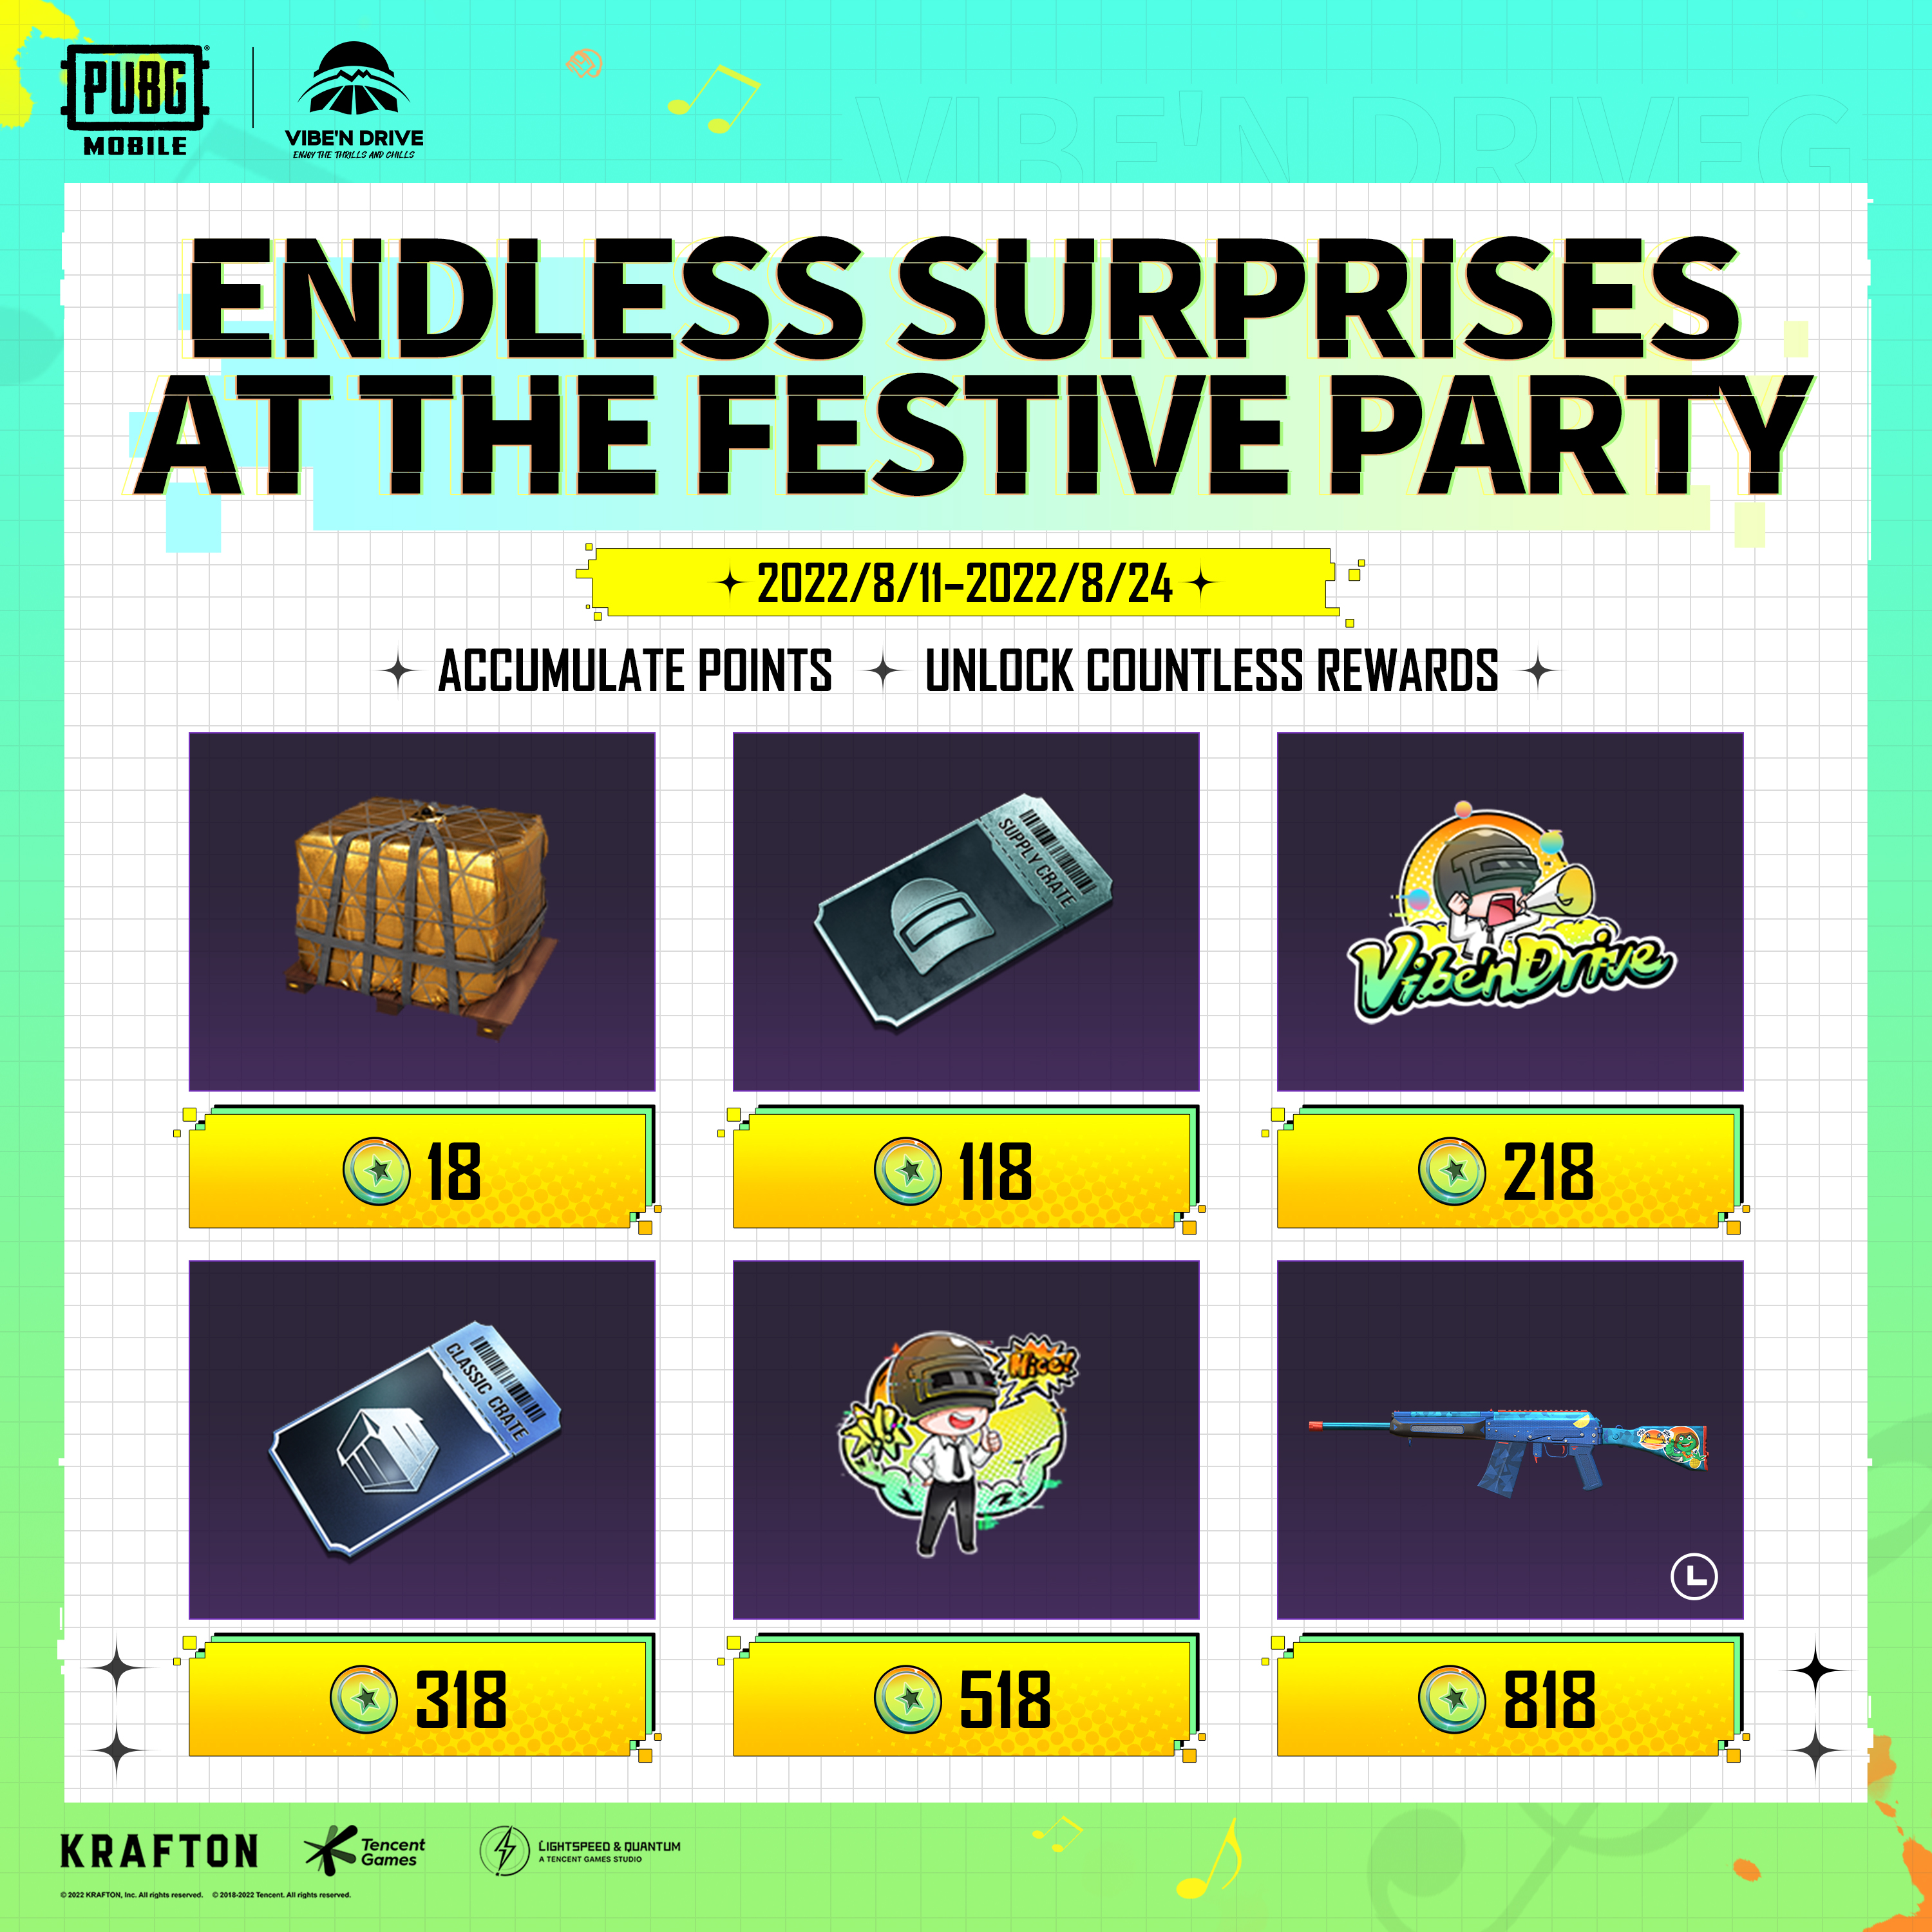 PUBG Mobile x Vibe'n Drive Login event: Login for 7 days and earn amazing rewards